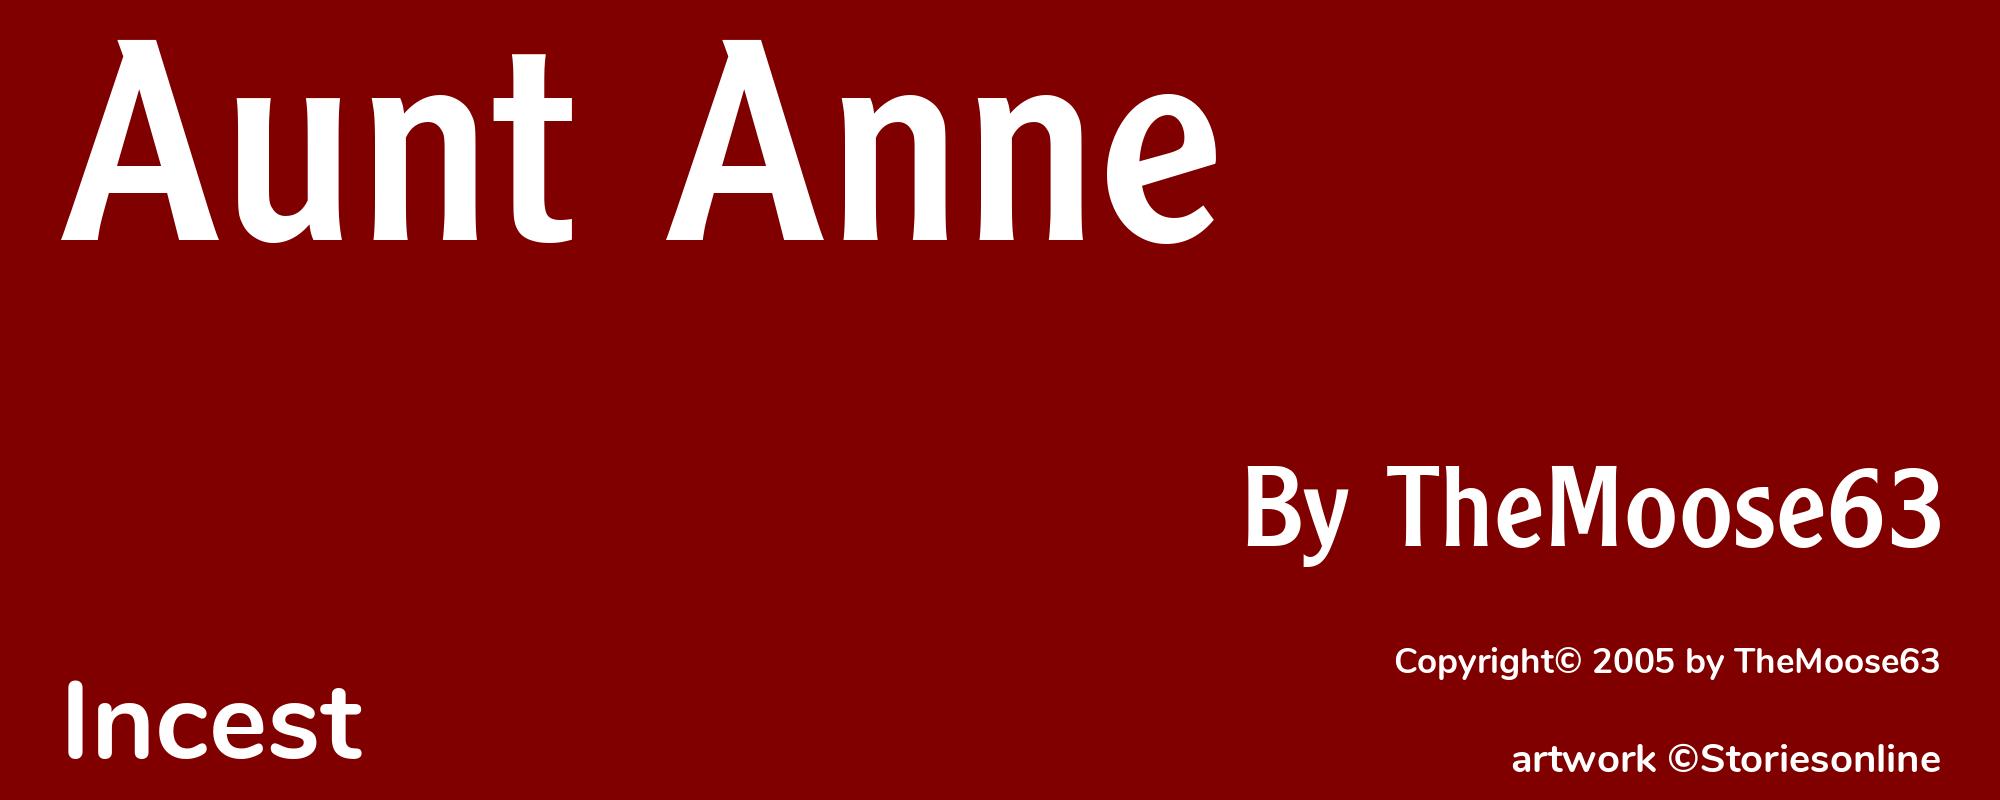 Aunt Anne - Cover